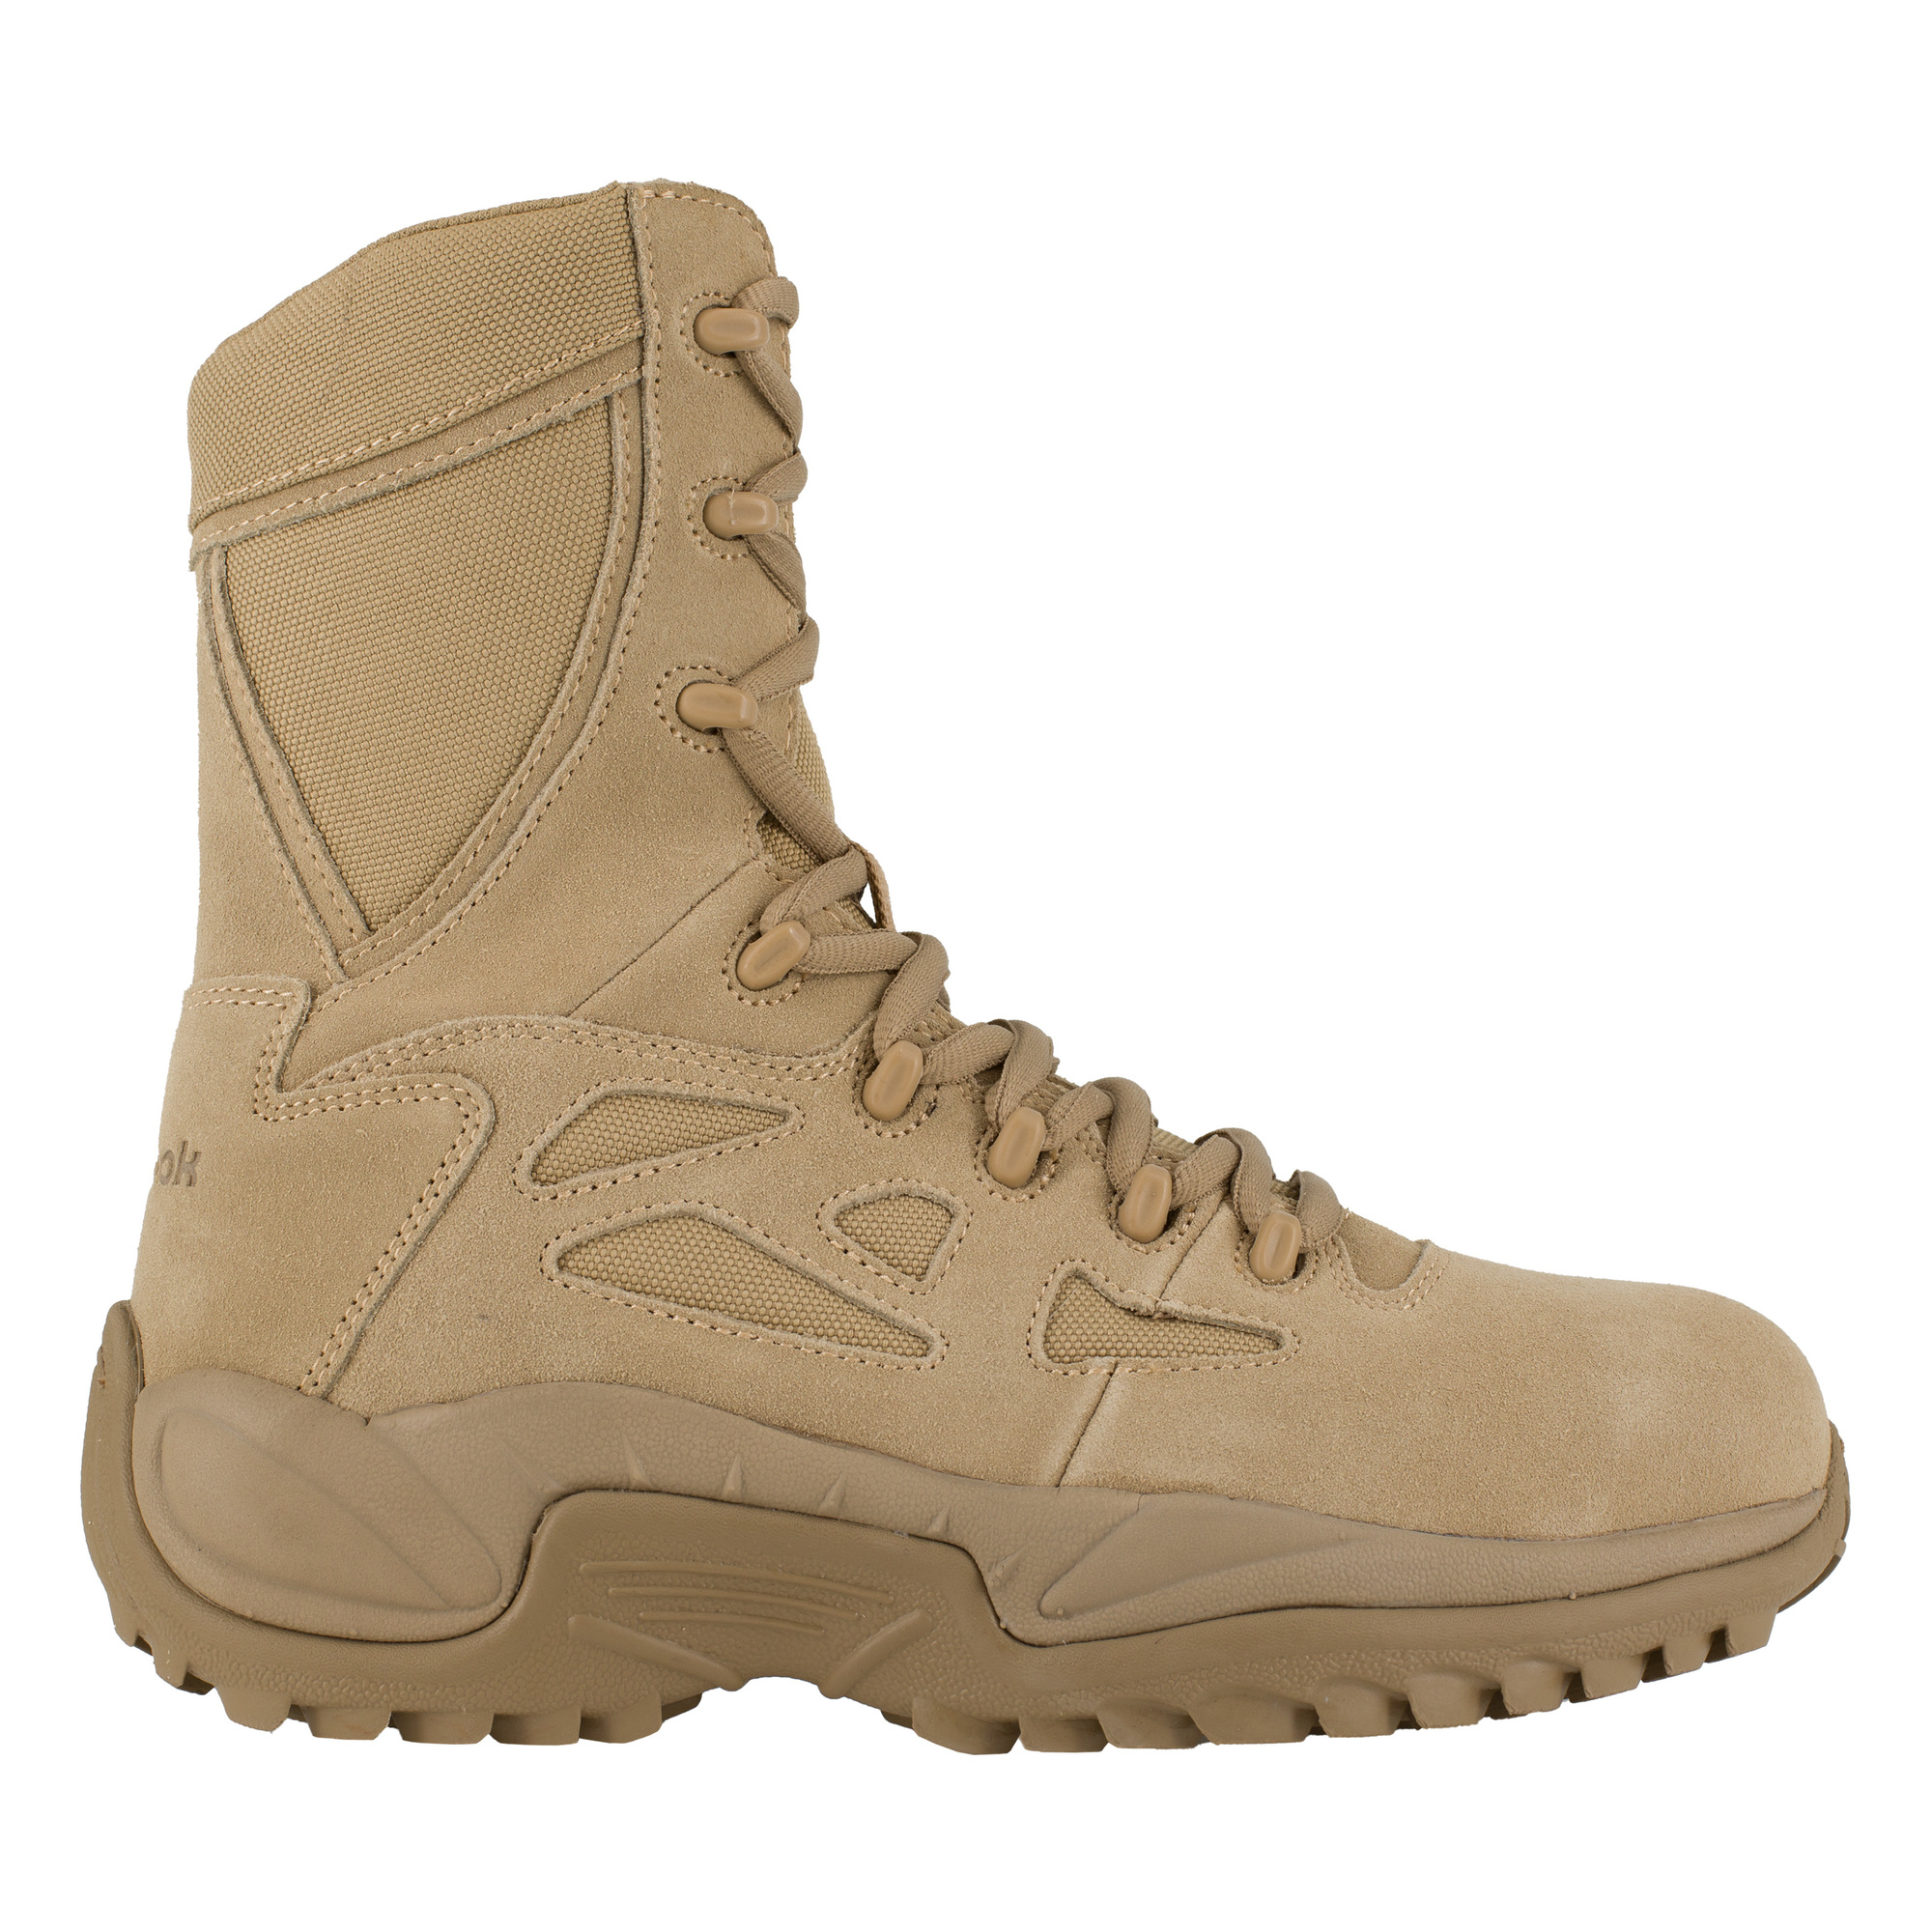 Reebok, 8Inch Stealth Tactical Boot with Side Zipper, Size 9 1/2, Width Medium, Color Desert Tan, Model RB894 -  RB894-M-09.5